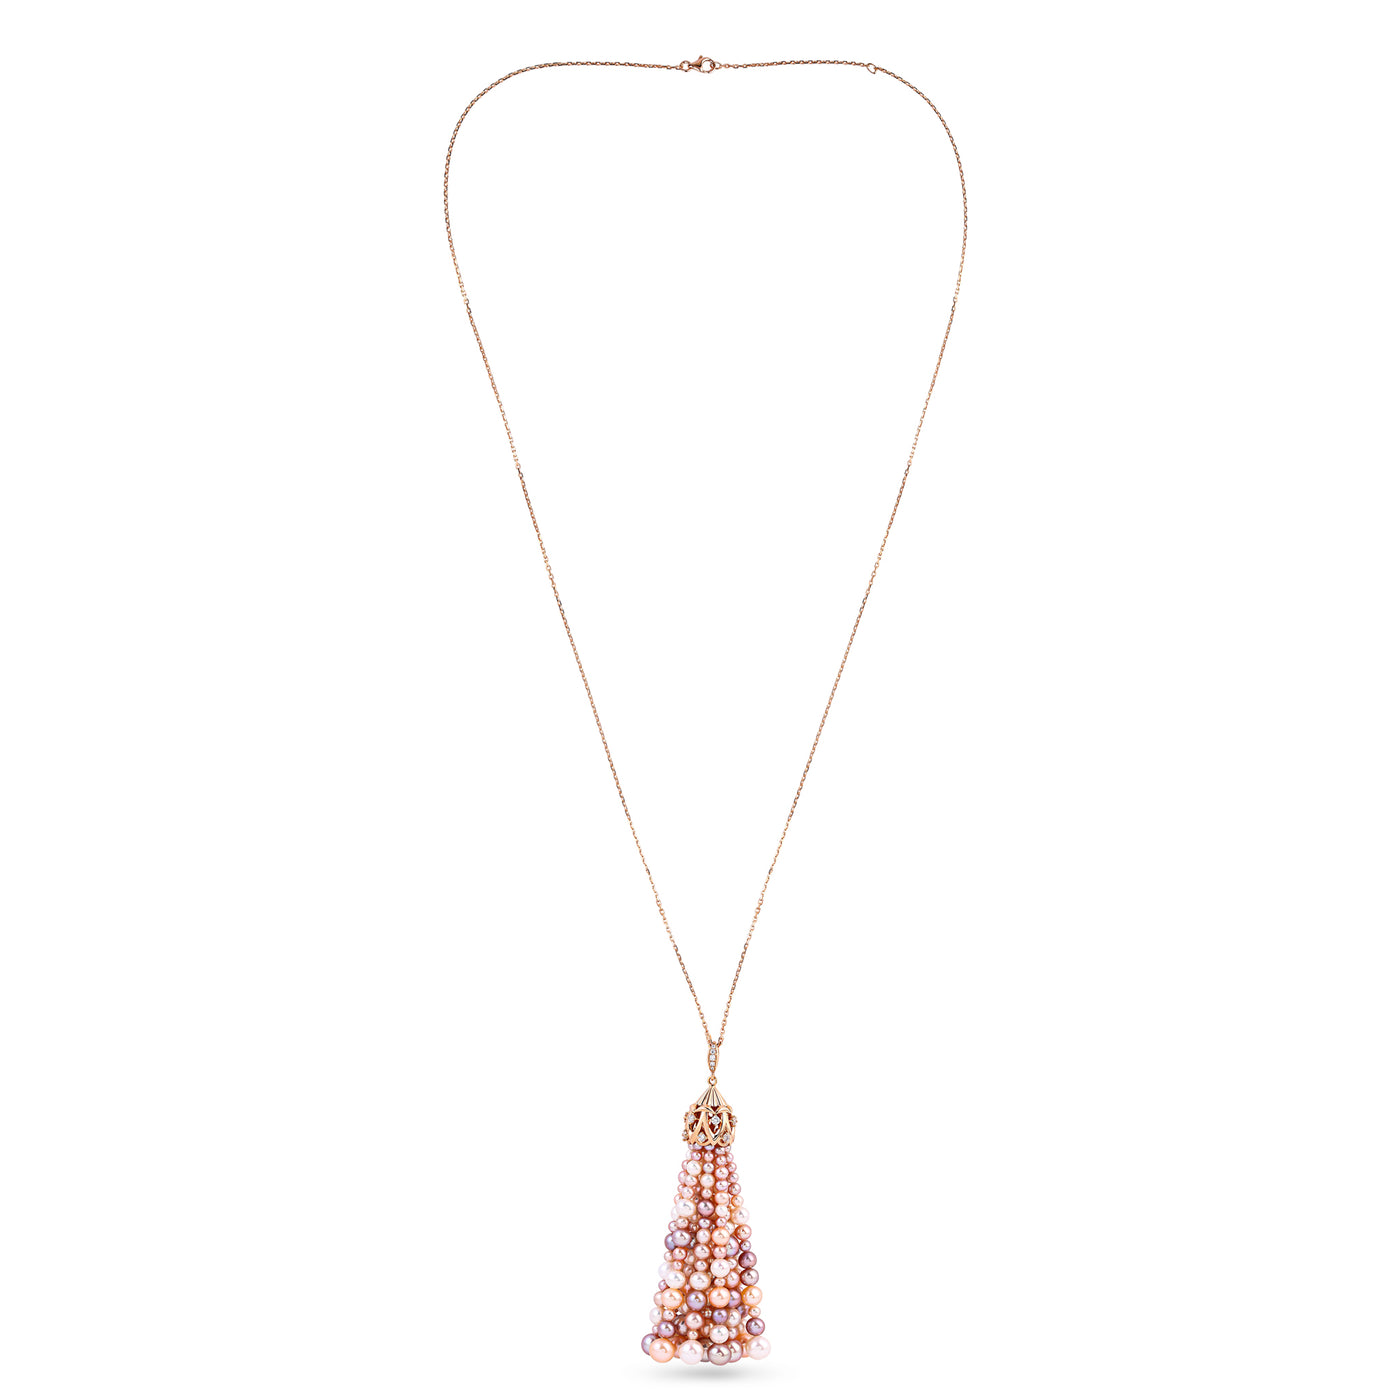 Rose Gold Diamond Pendant with Multi-Color Pearls